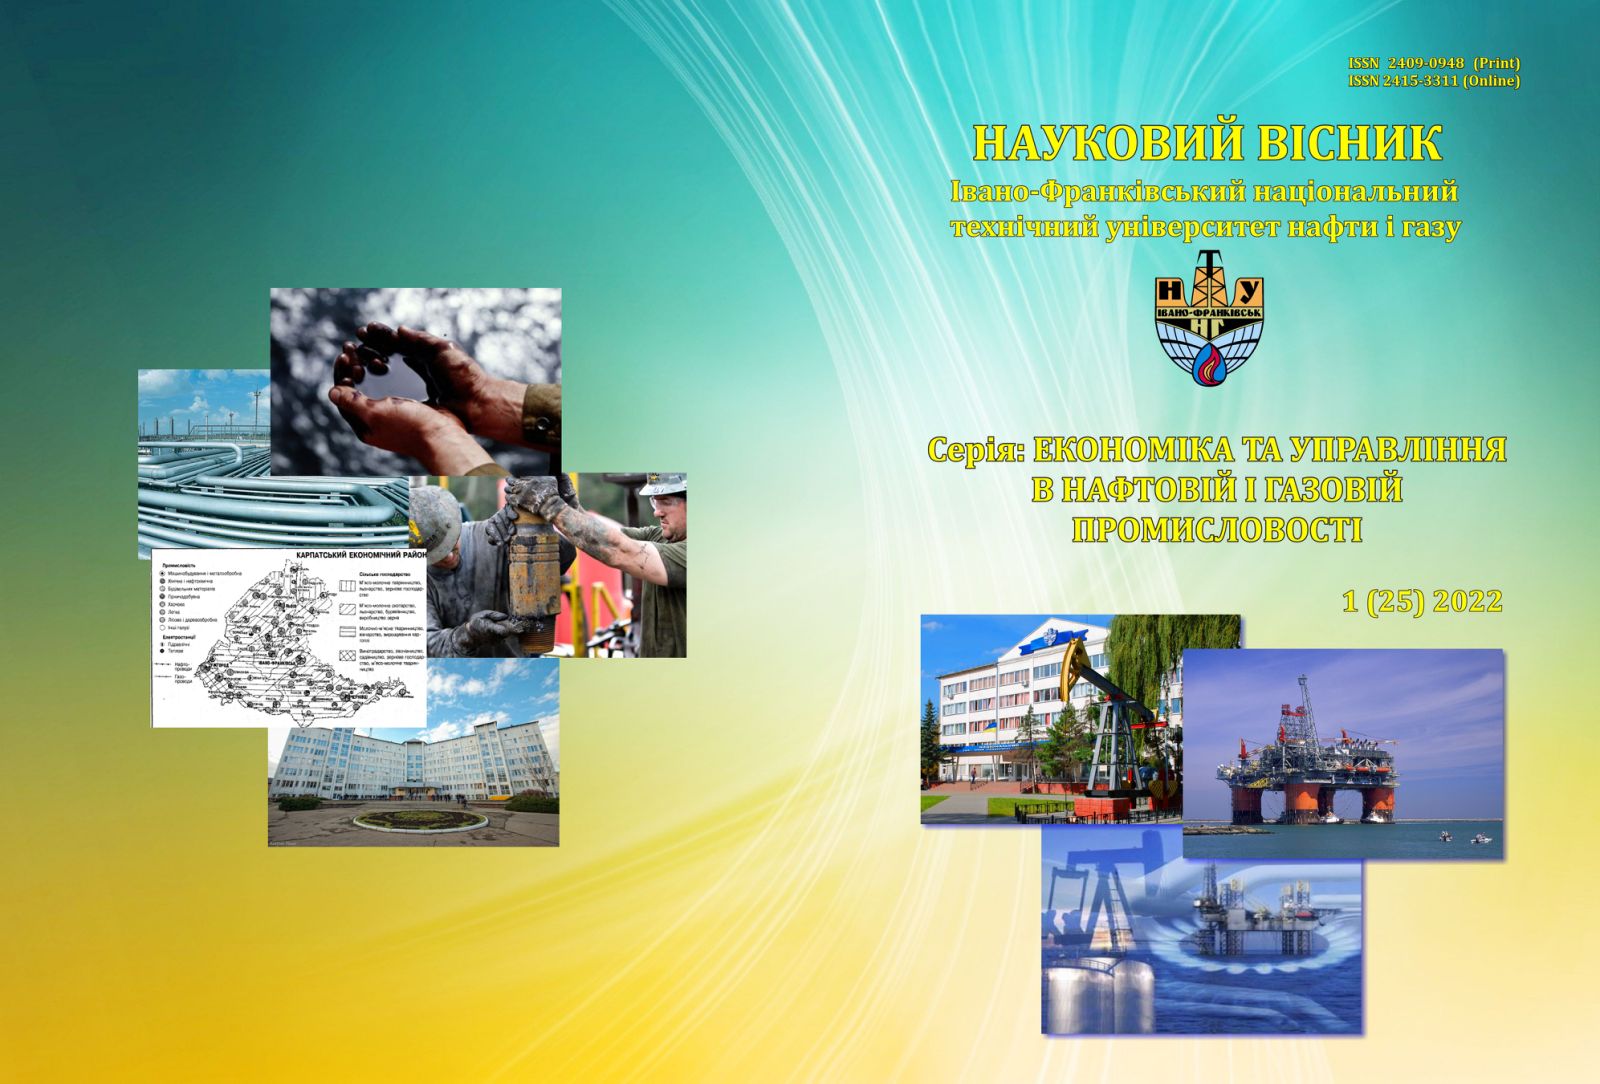 					View No. 1(25) (2022): Scientific Herald Of Ivano-Frankivsk National Technical University of Oil and Gas (edition topic: «Economy and management of oil and gas industry»)
				